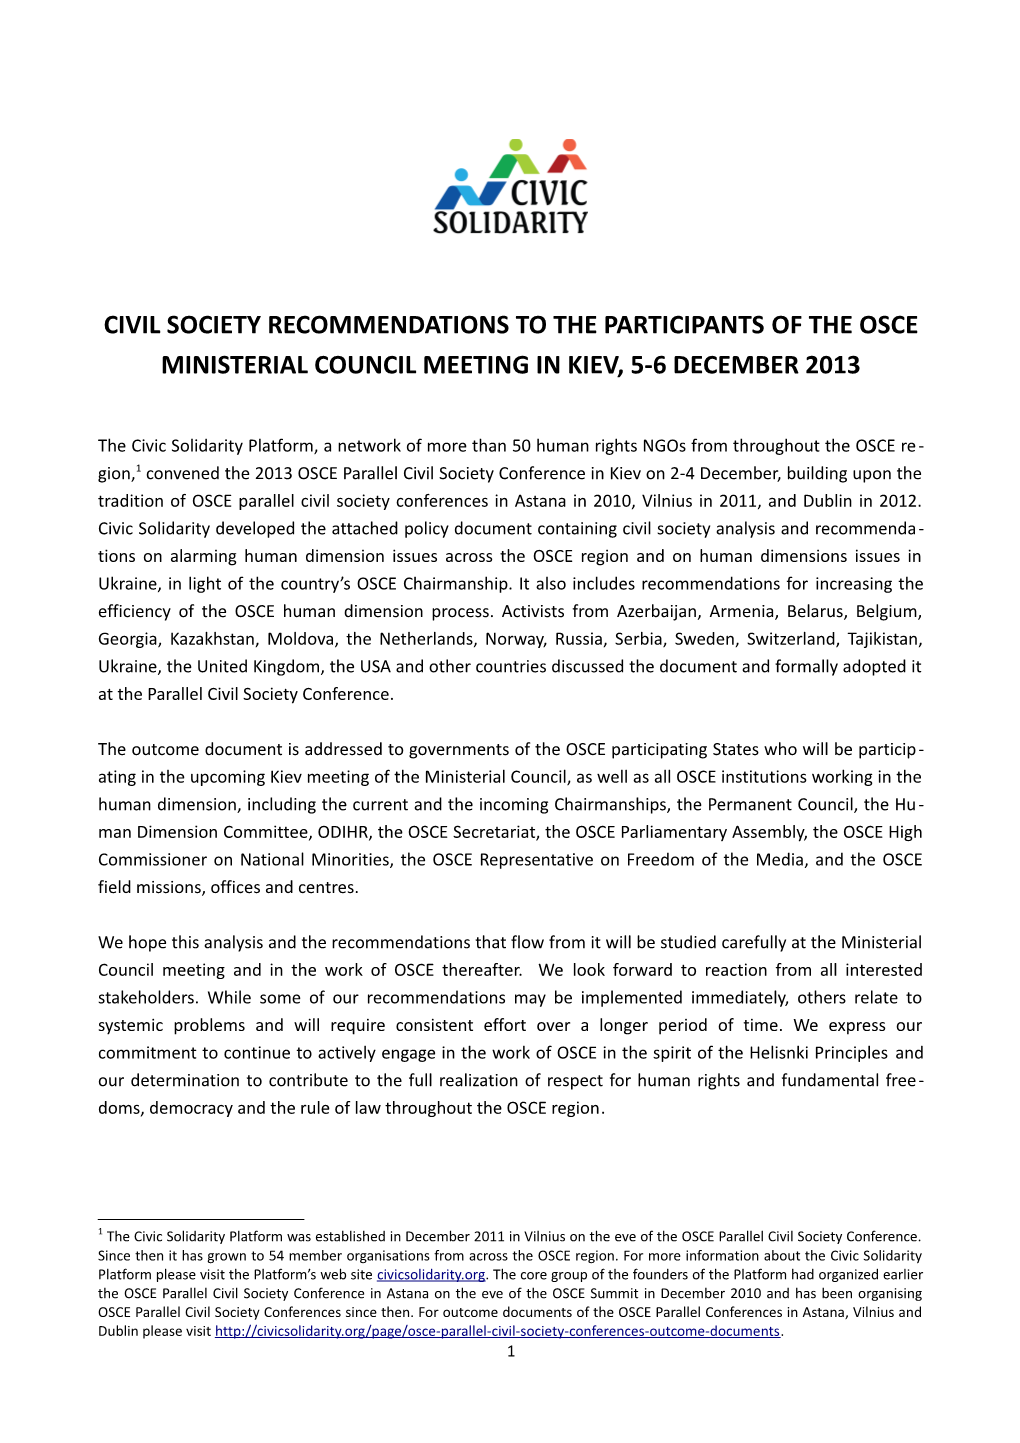 Civil Society Recommendations to the Participants of the Osce Ministerial Council Meeting